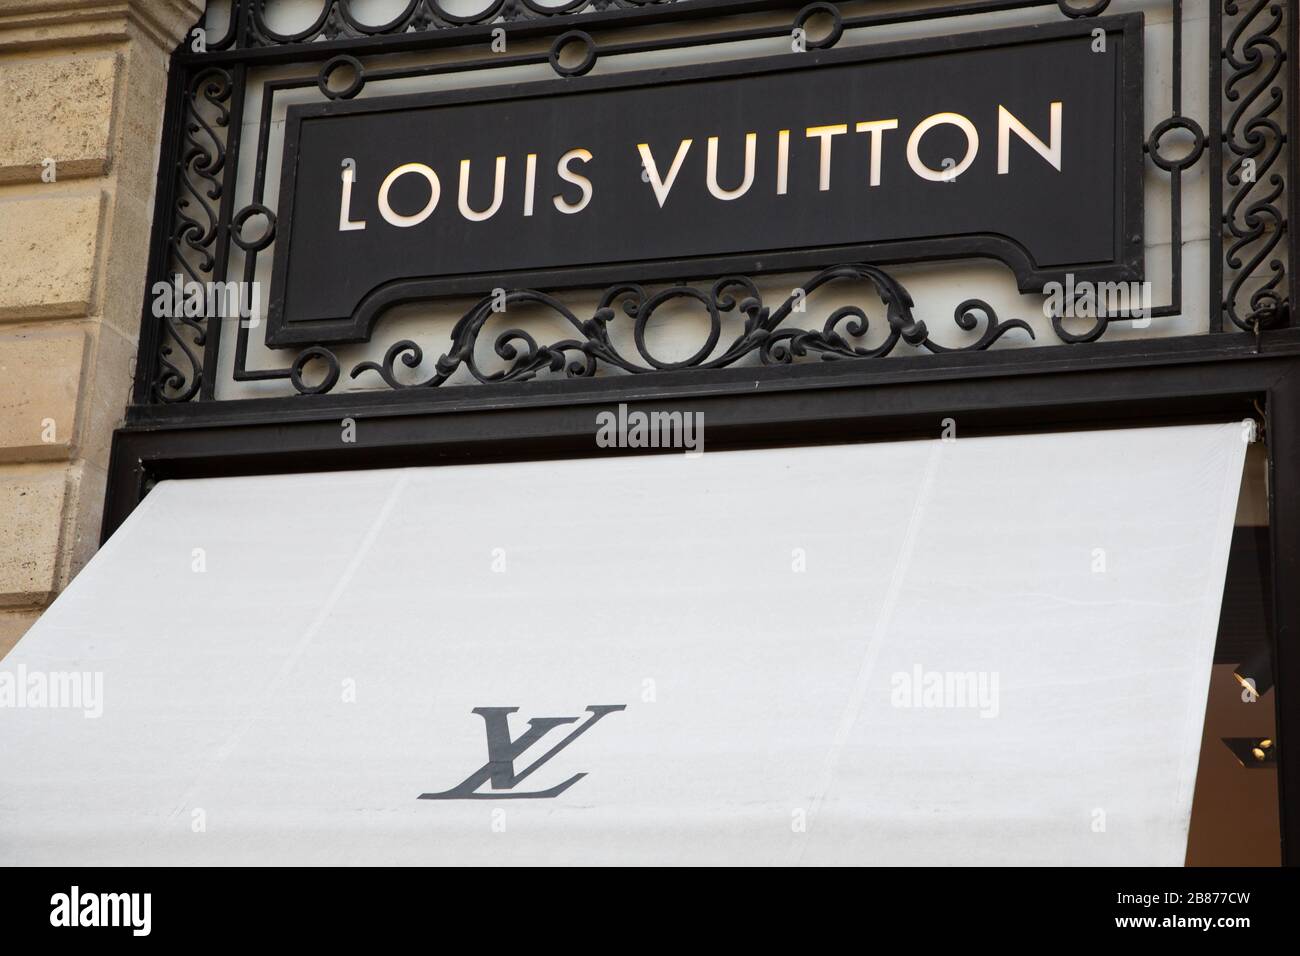 Louis Vuitton Stock Photos and Images - 123RF